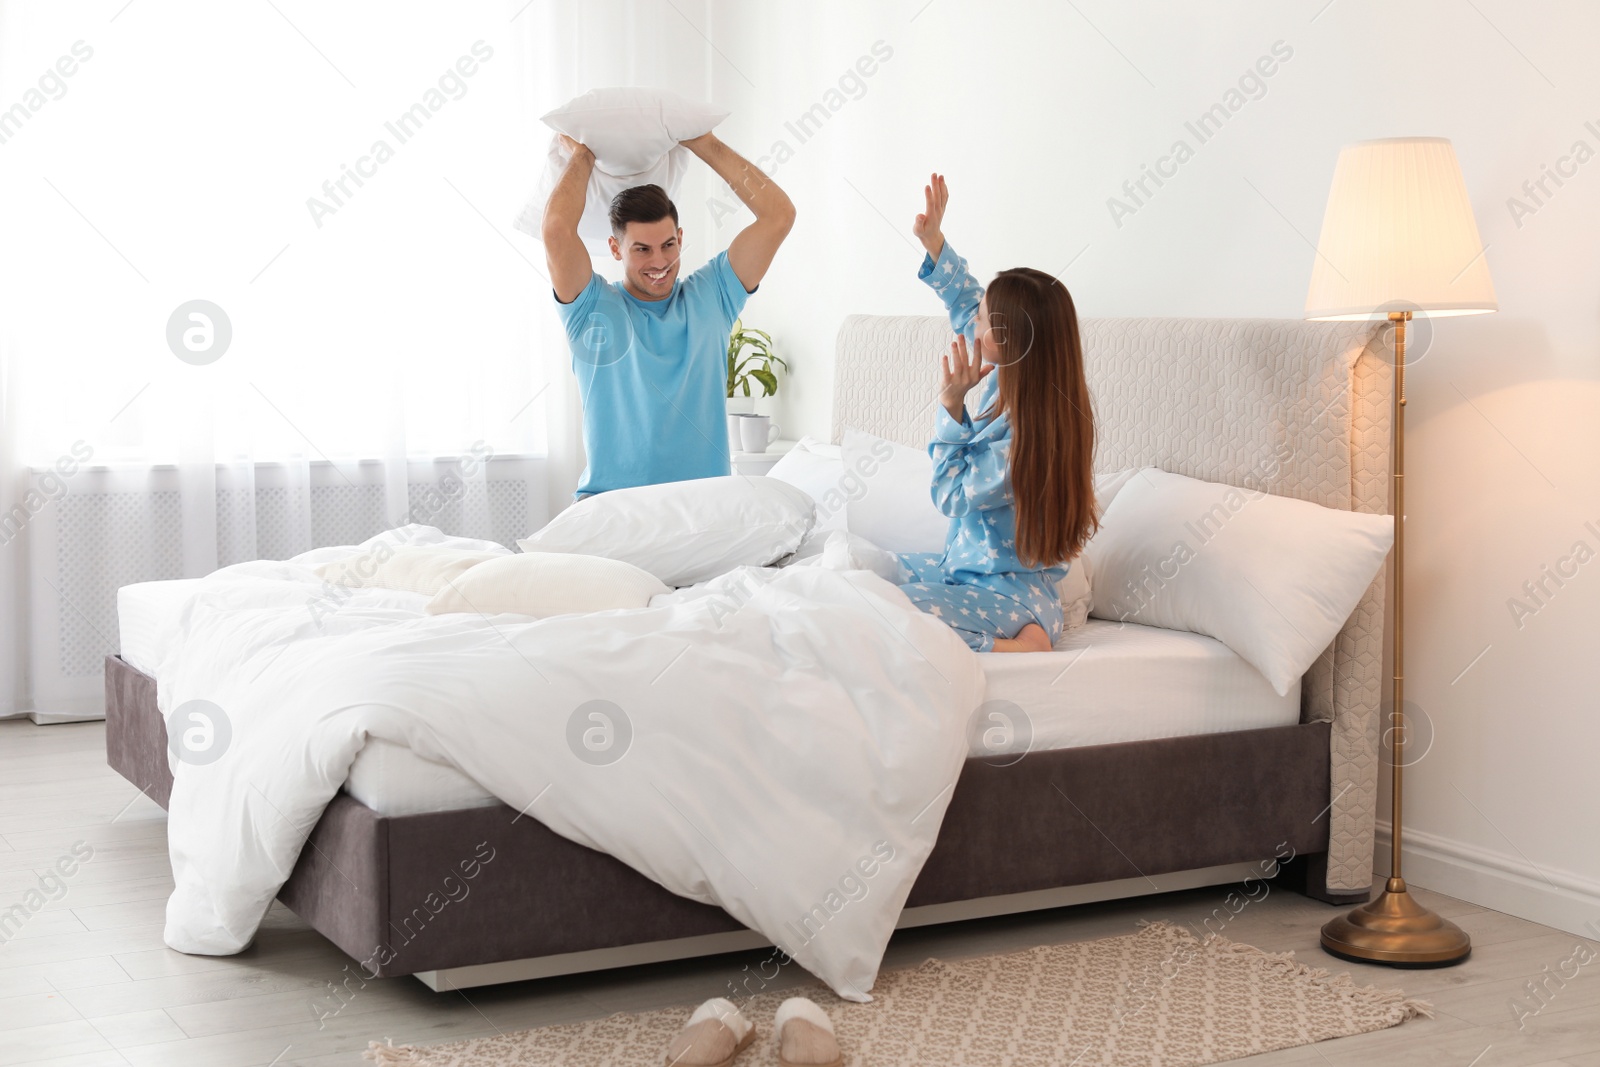 Photo of Happy couple having pillow fight in bedroom